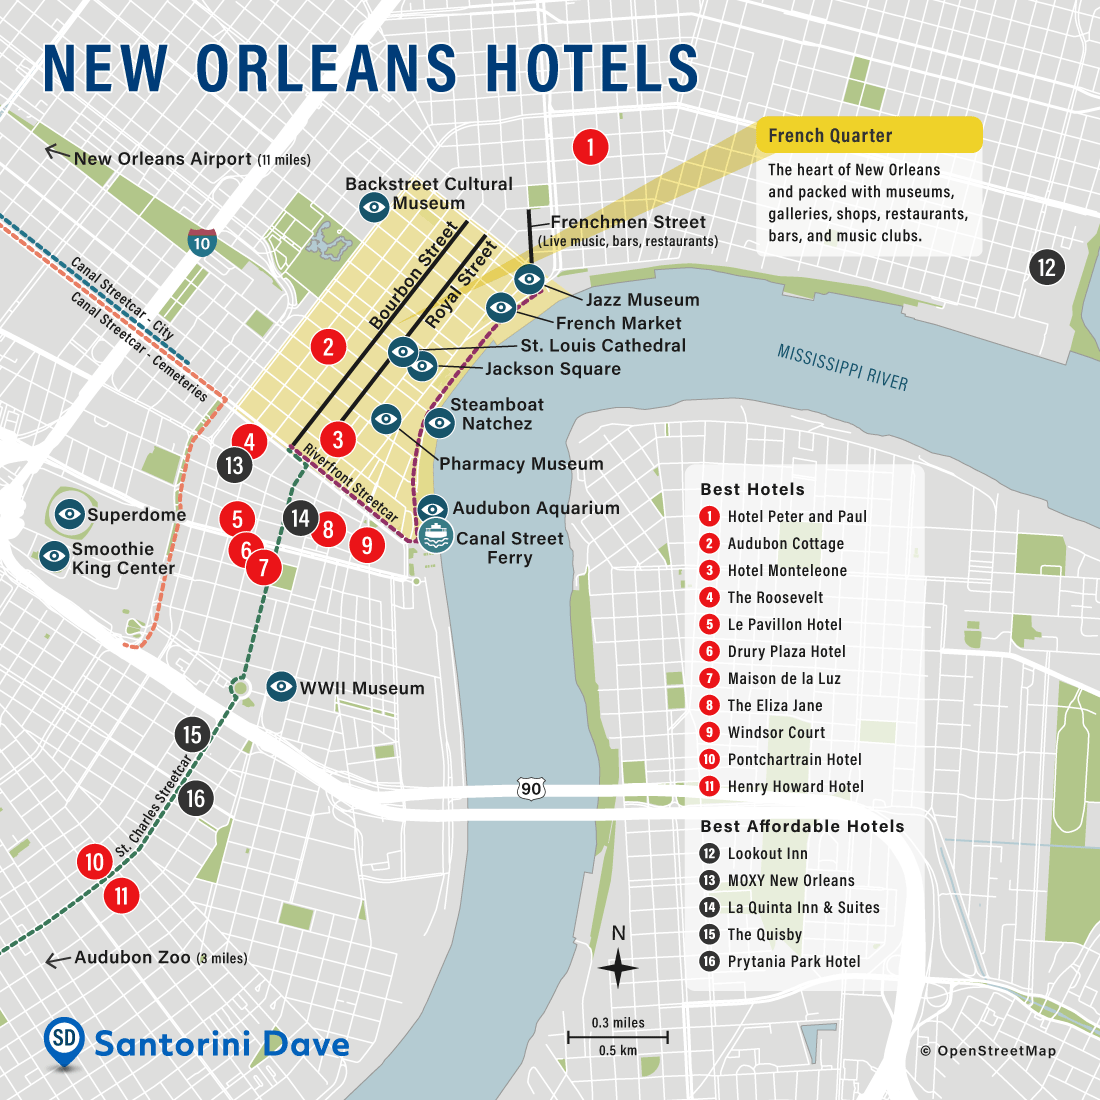 Map of Best Hotels and Neighborhoods in New Orleans, Louisiana.